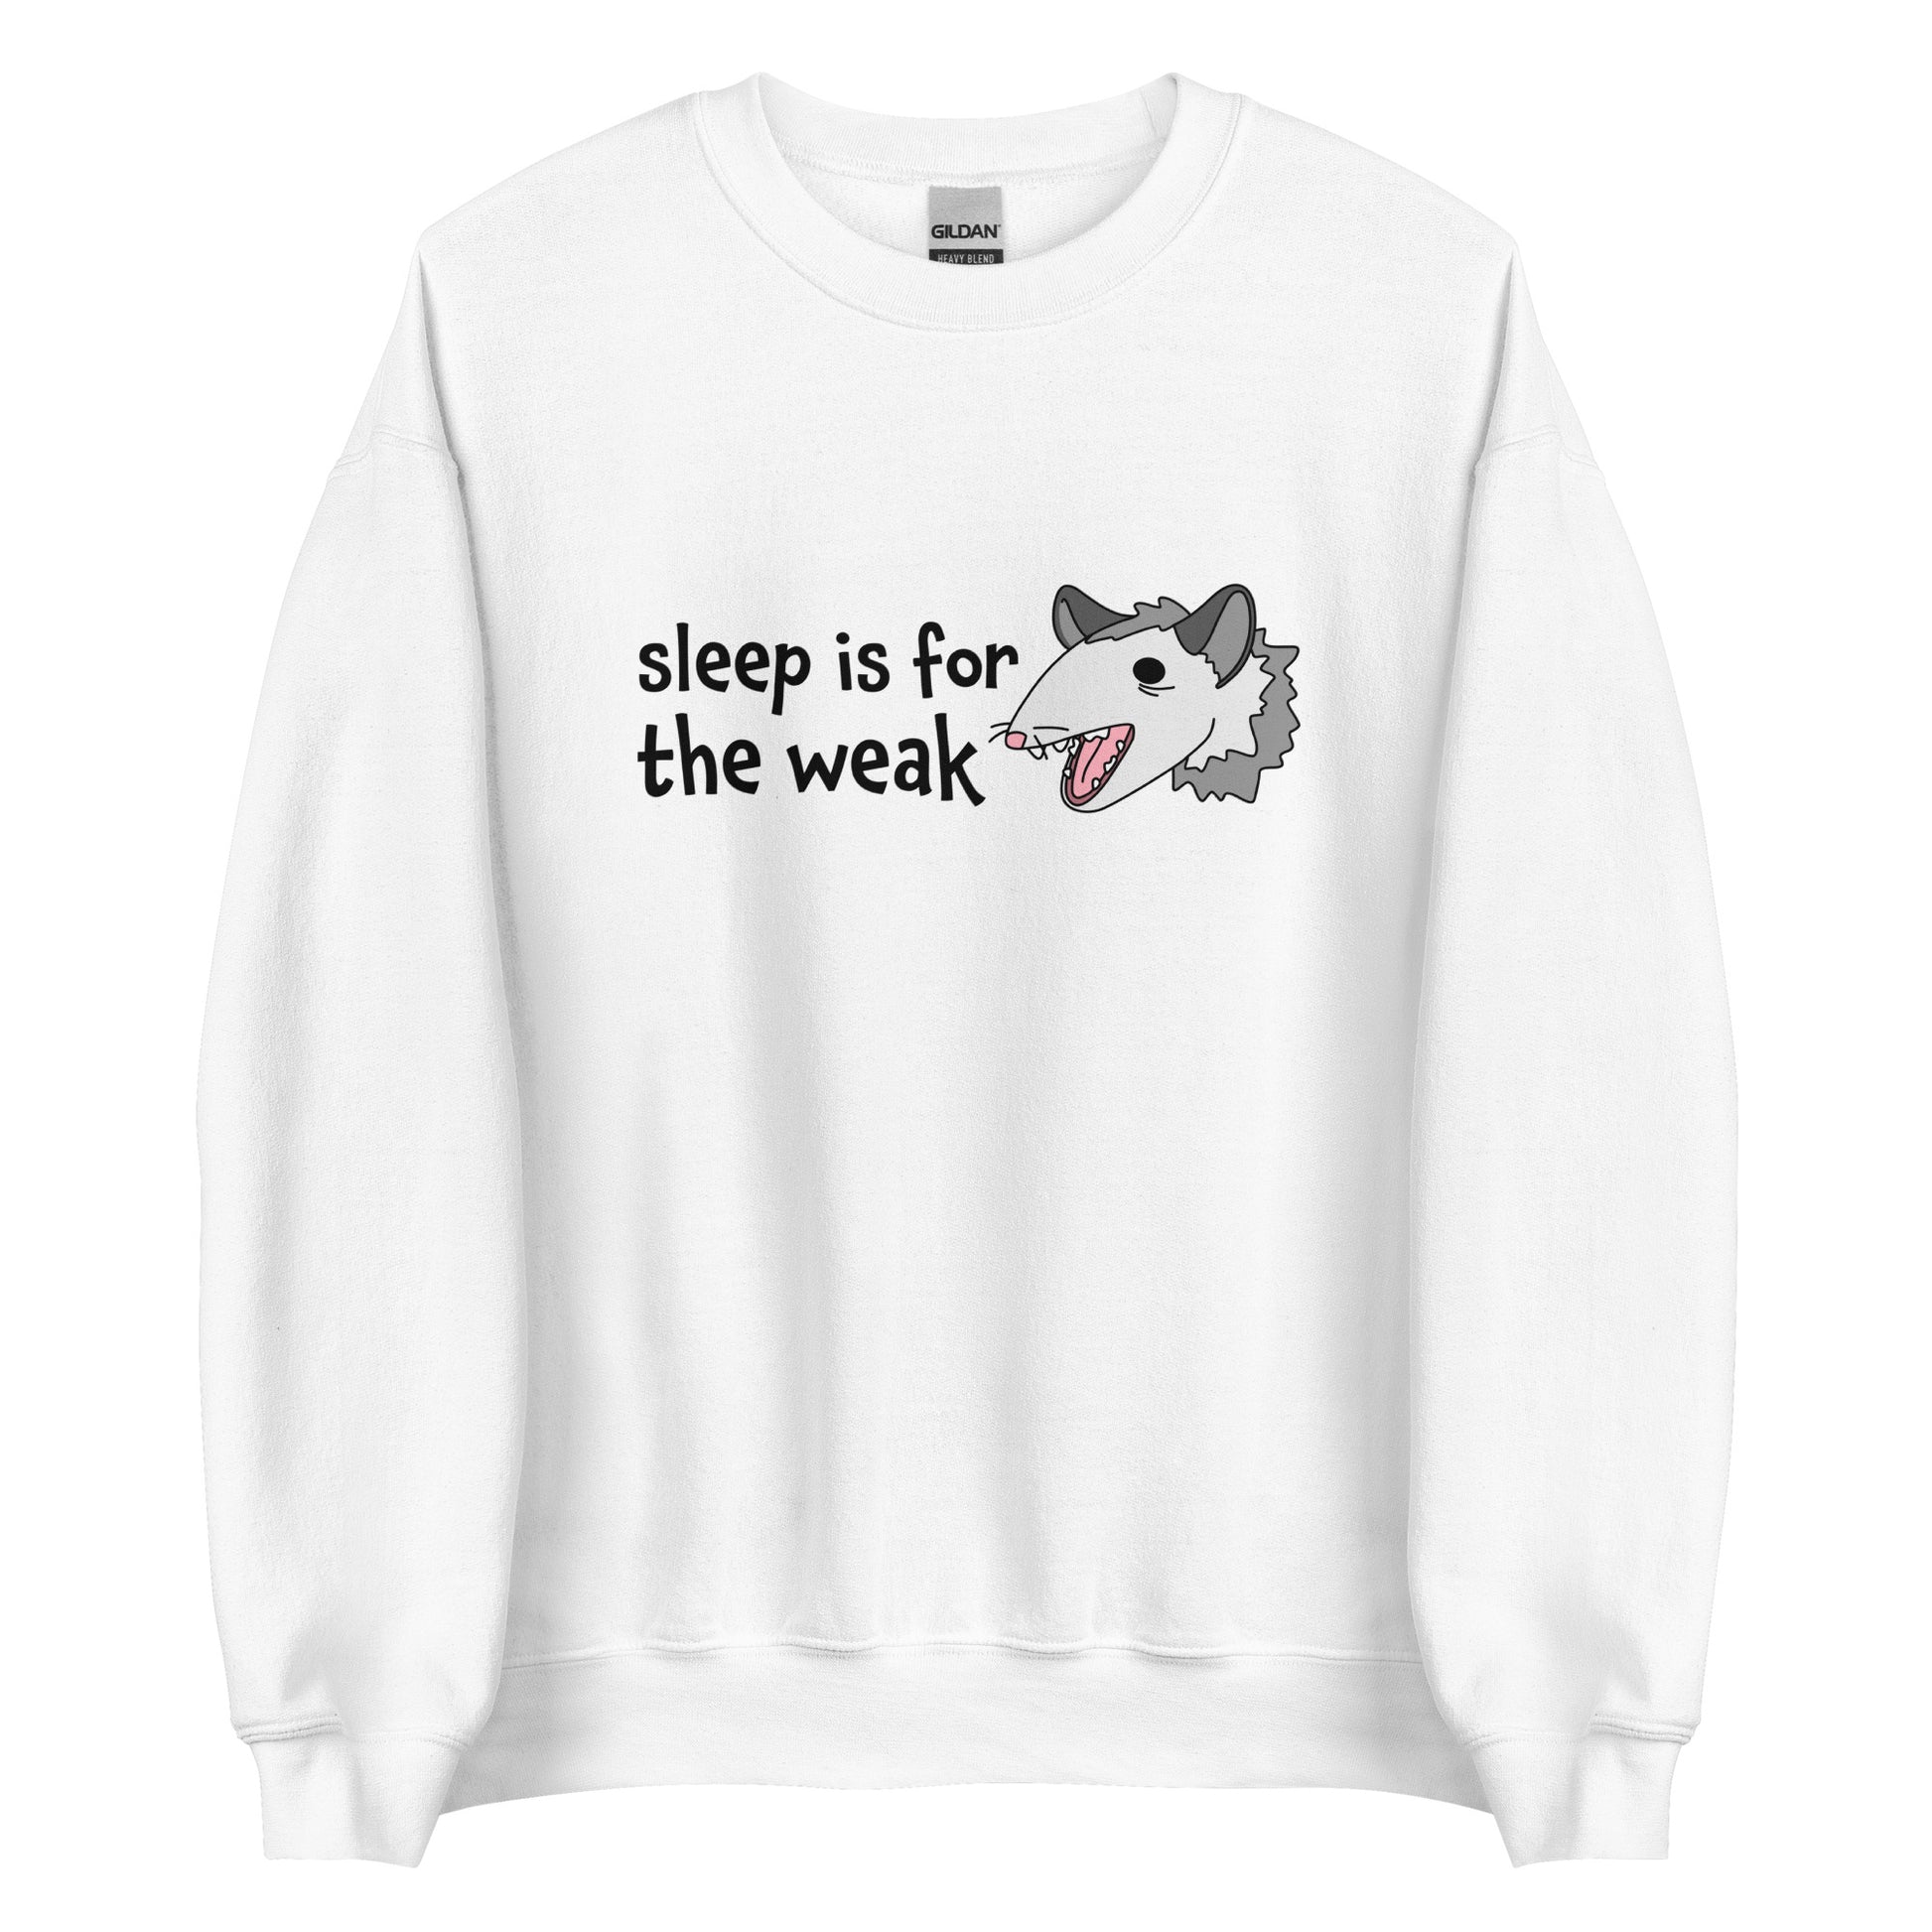 A white crewneck sweatshirt featuring an illustration of an opossum with its mouth open, as if it was yelling. Text alongside the opossum reads "sleep is for the weak"